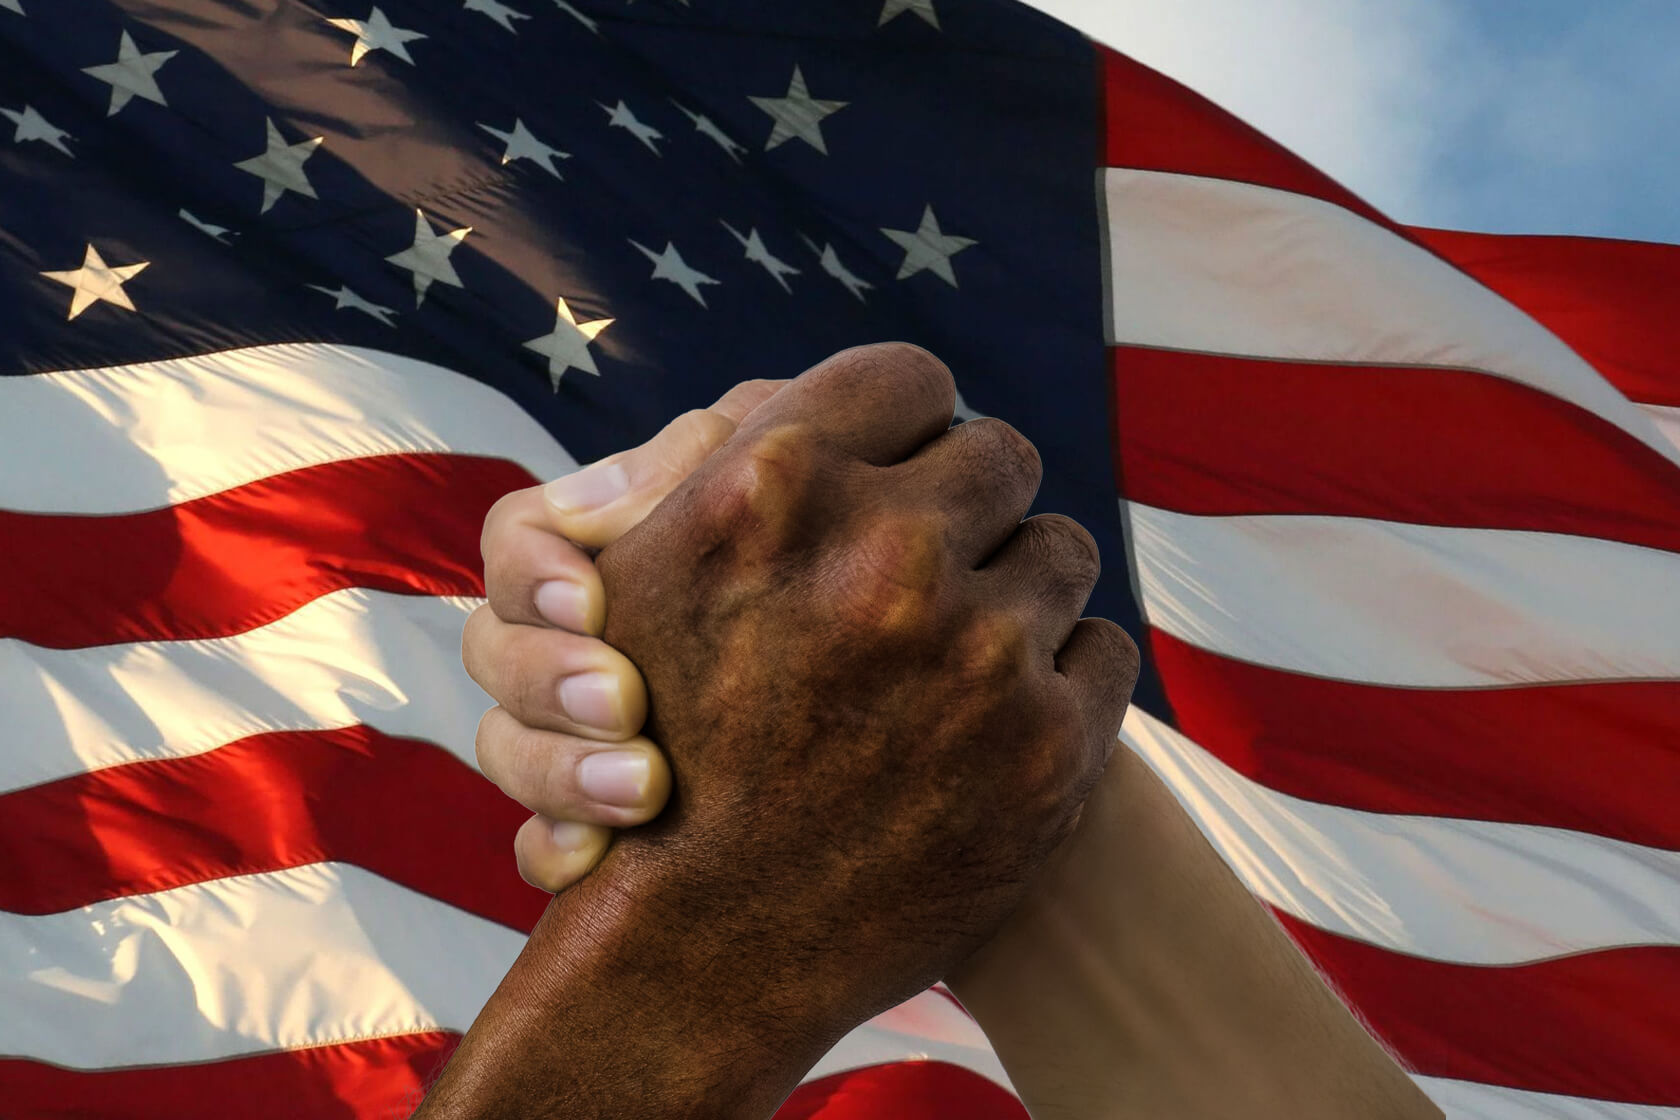 Image of hands in front of American flag.